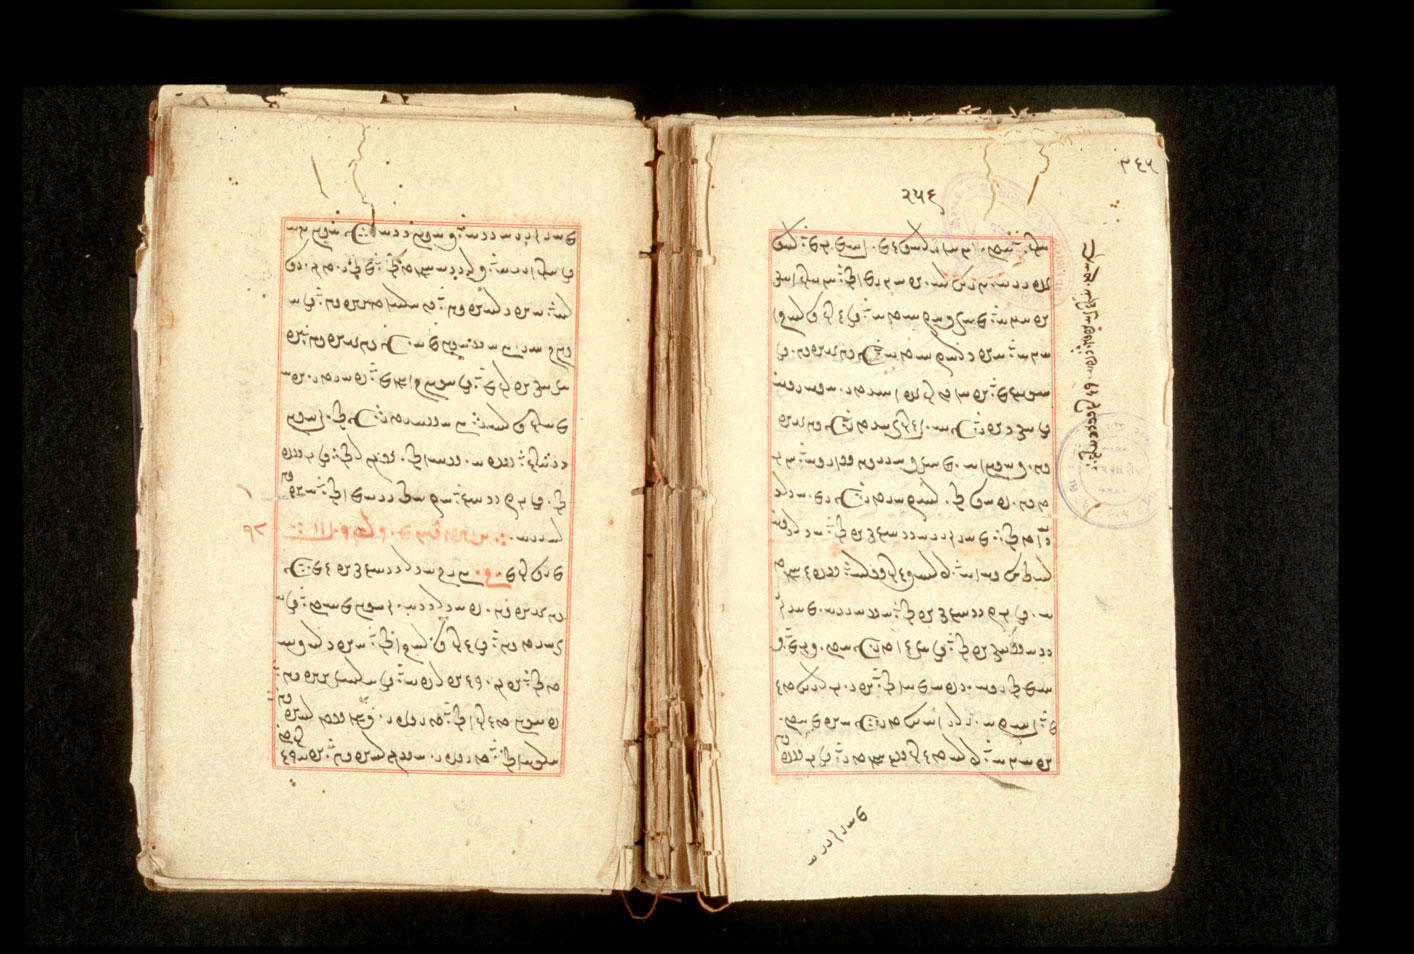 Folios 256v (right) and 257r (left)